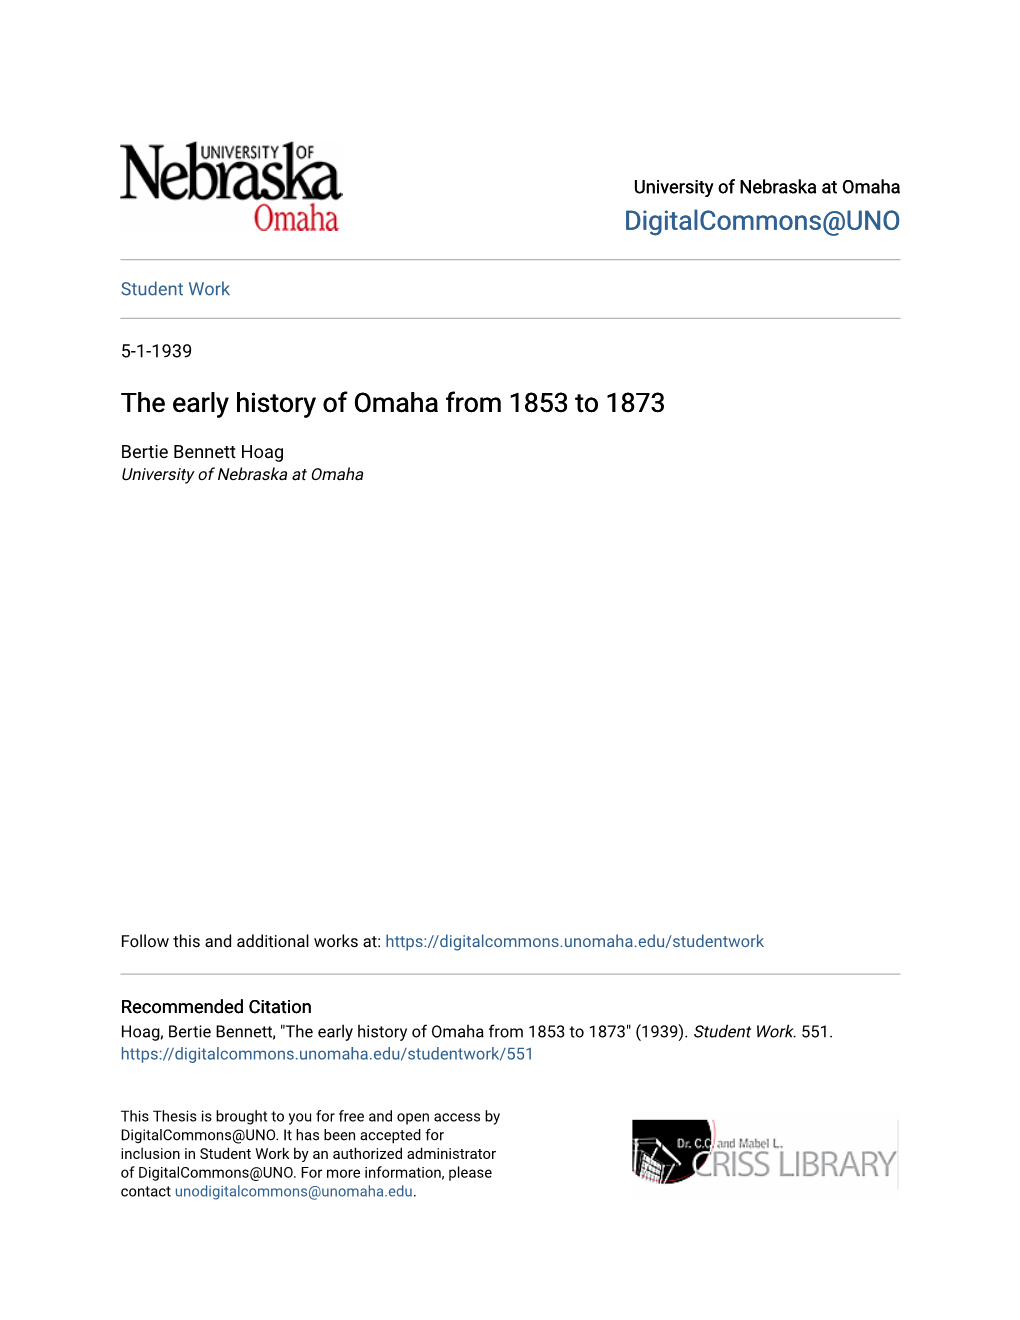 The Early History of Omaha from 1853 to 1873